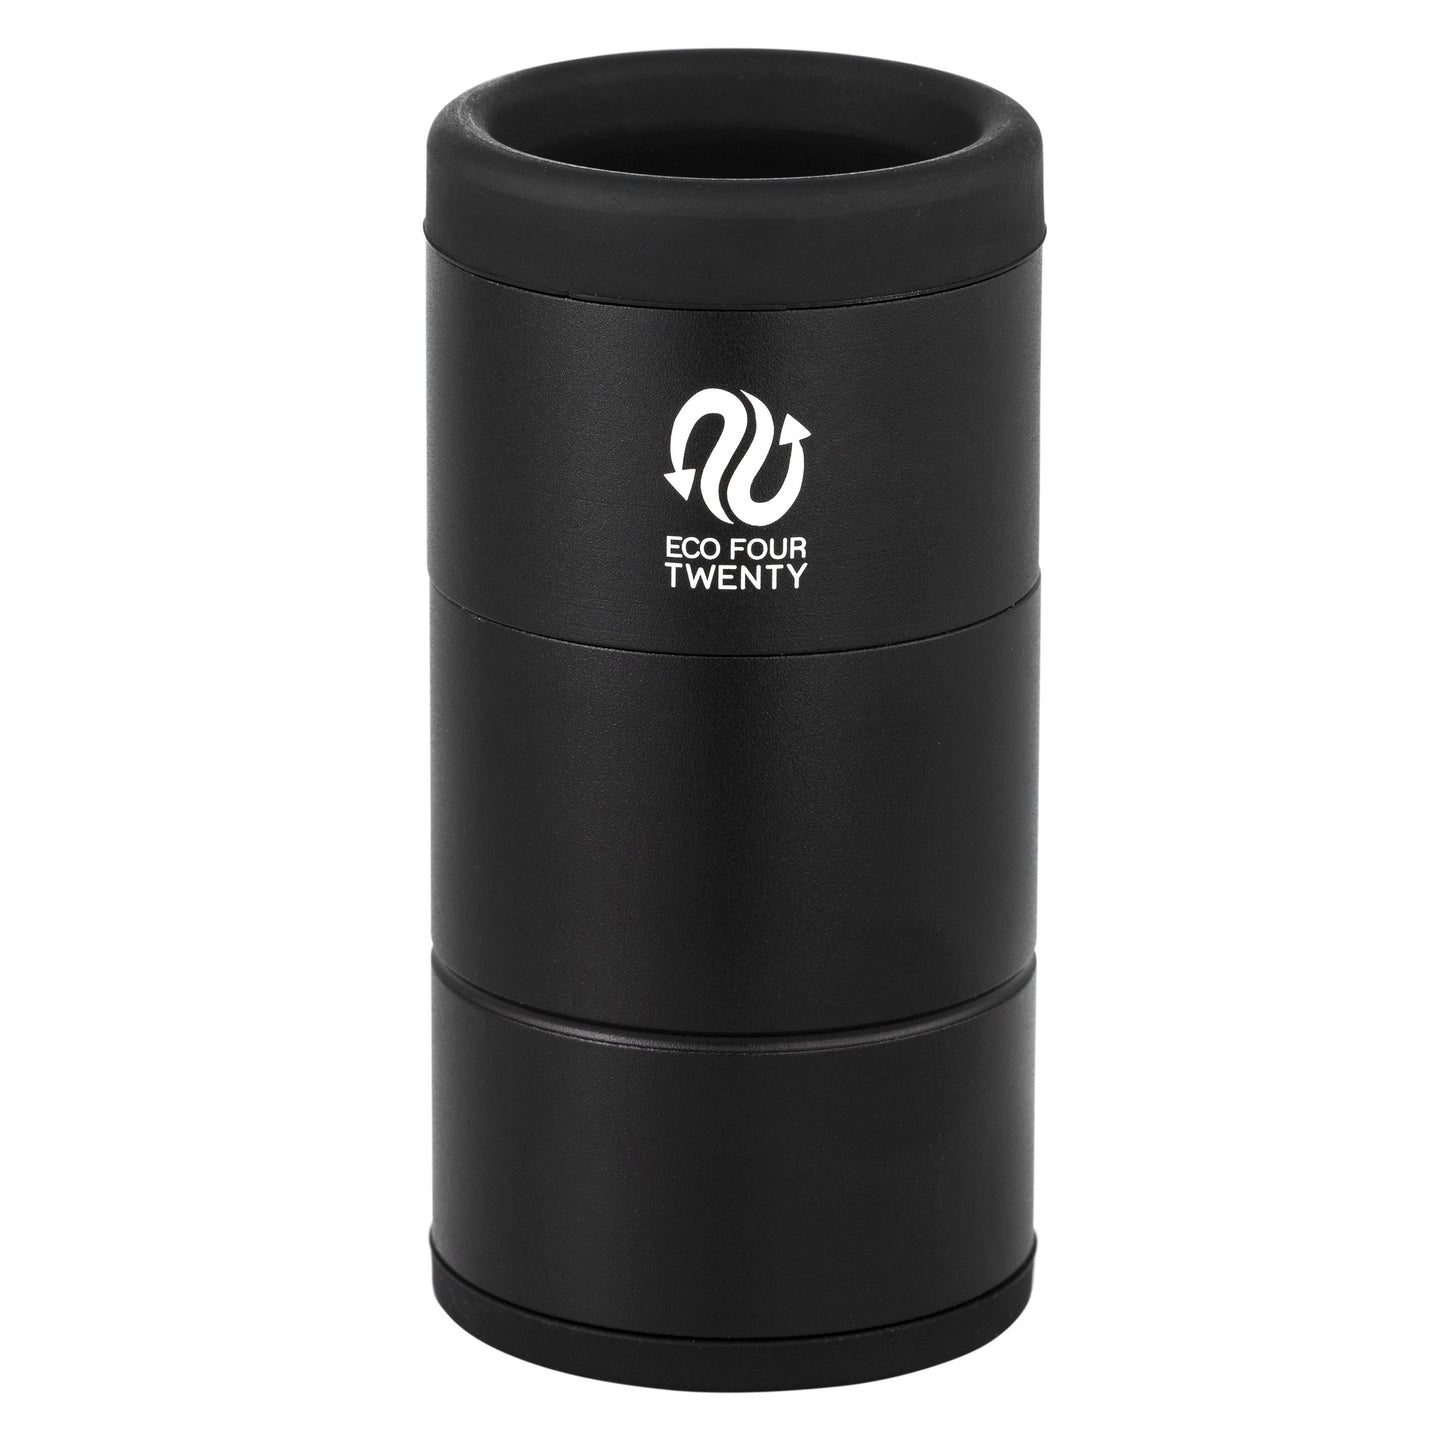 Personal Air Filter - With Eco Friendly Replaceable Cartridge System